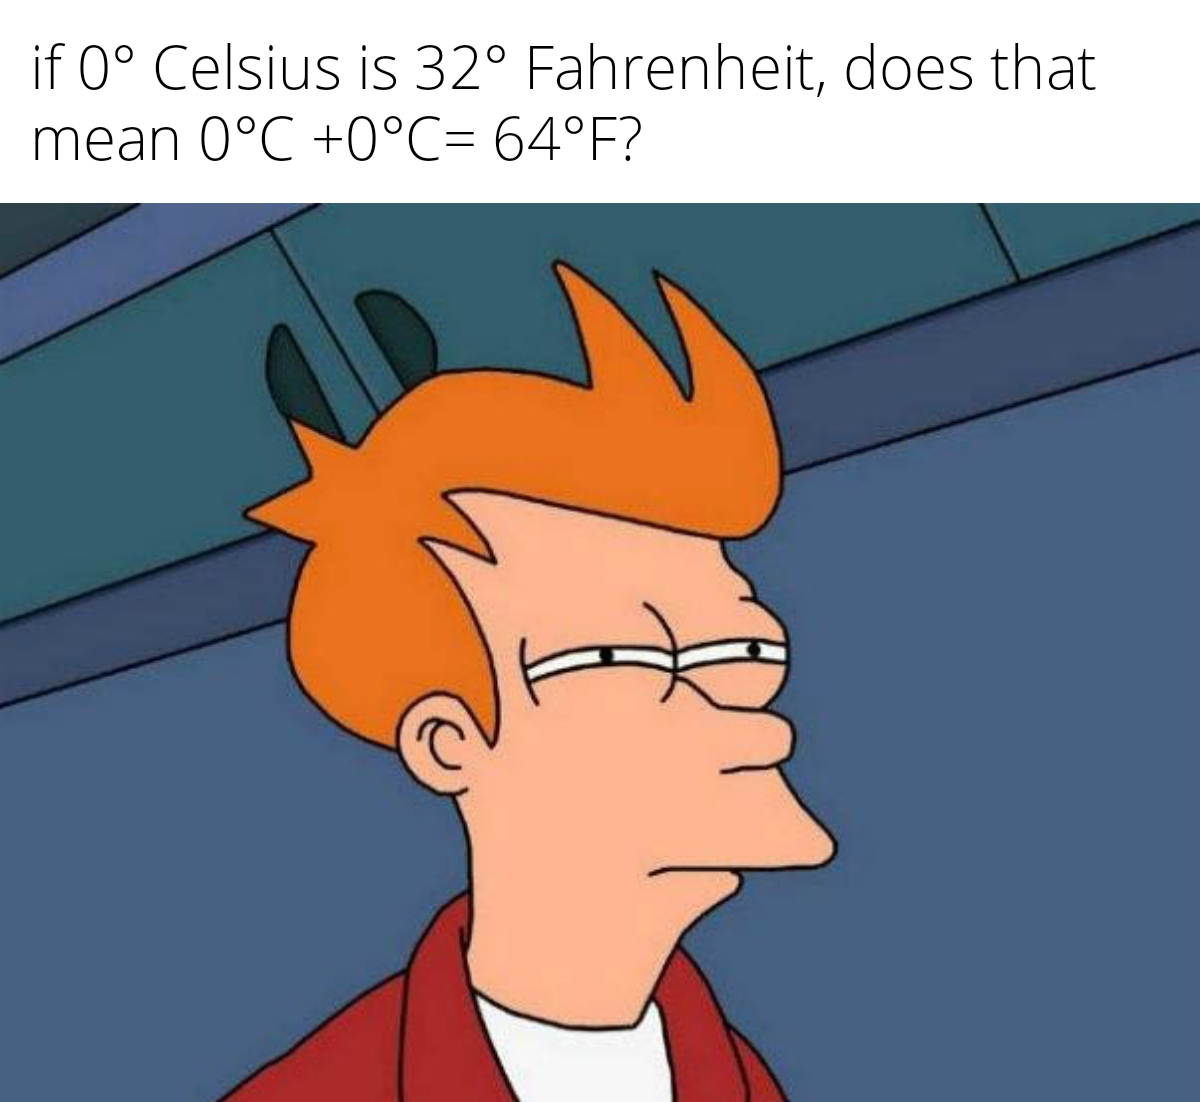 funny memes and pics - save you in group chats - if 0 Celsius is 32 Fahrenheit, does that mean 0C 0C 64F?